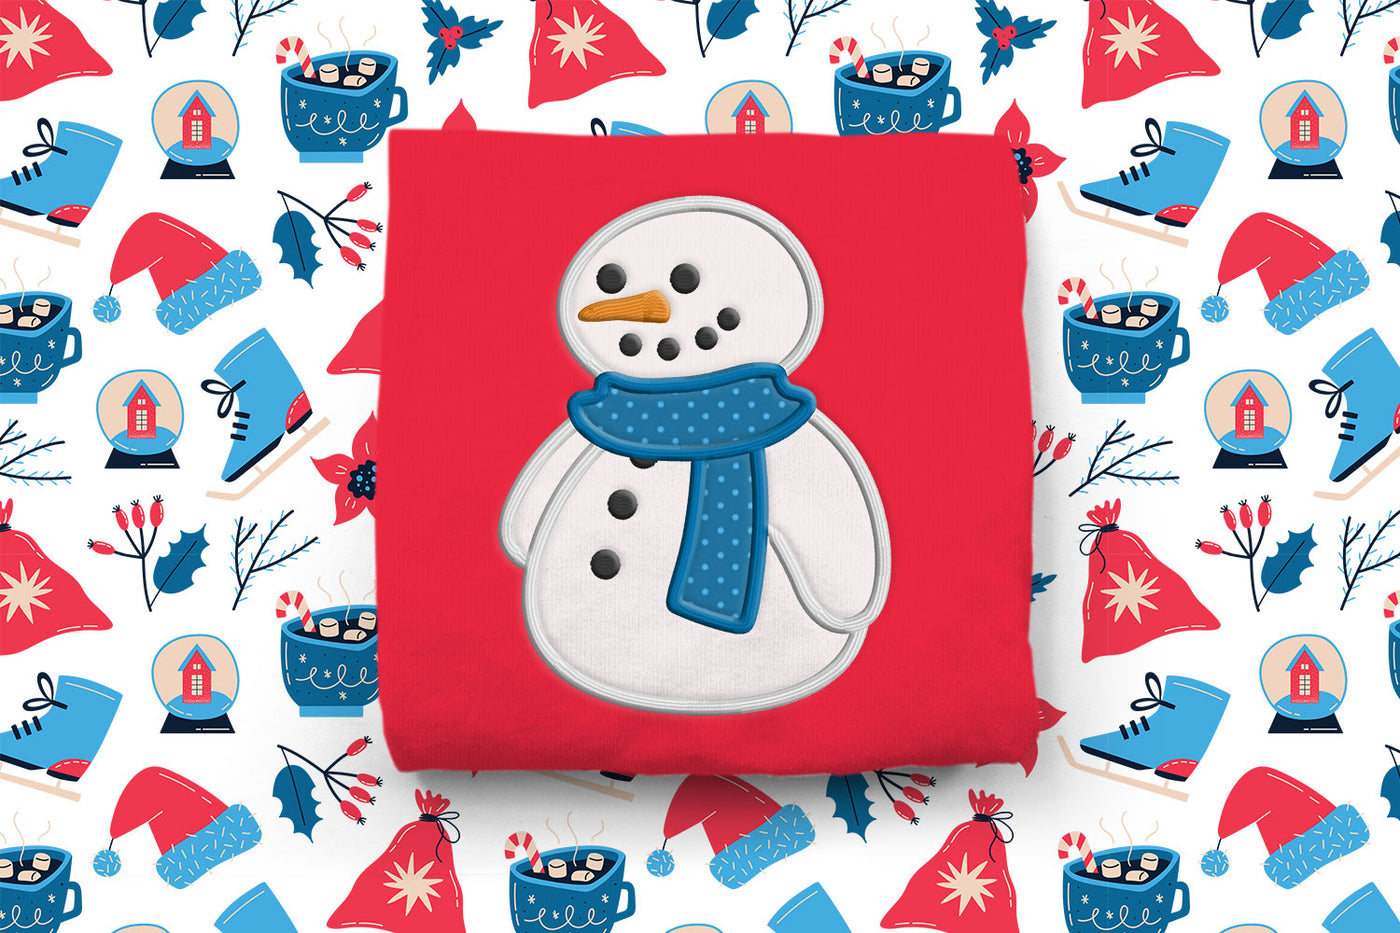 Chubby snowman applique embroidery design file